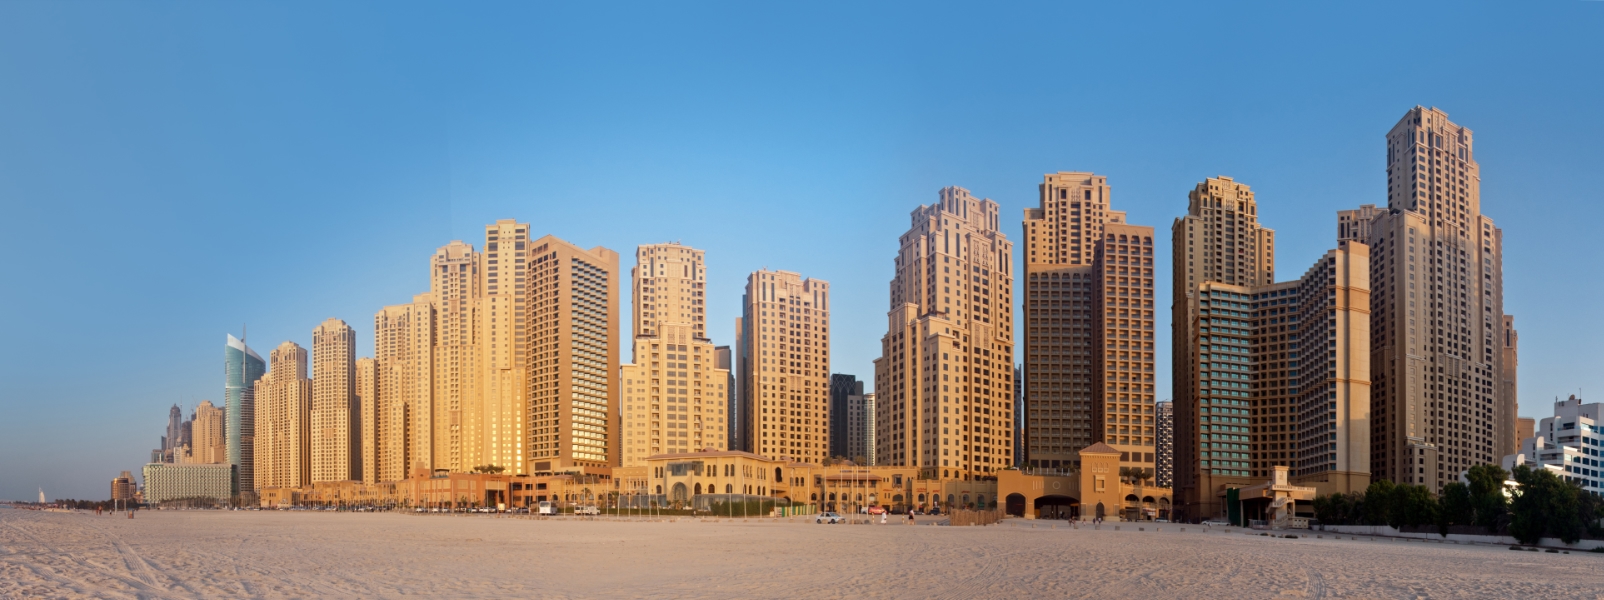 Building happiness – Wellbeing in Dubai